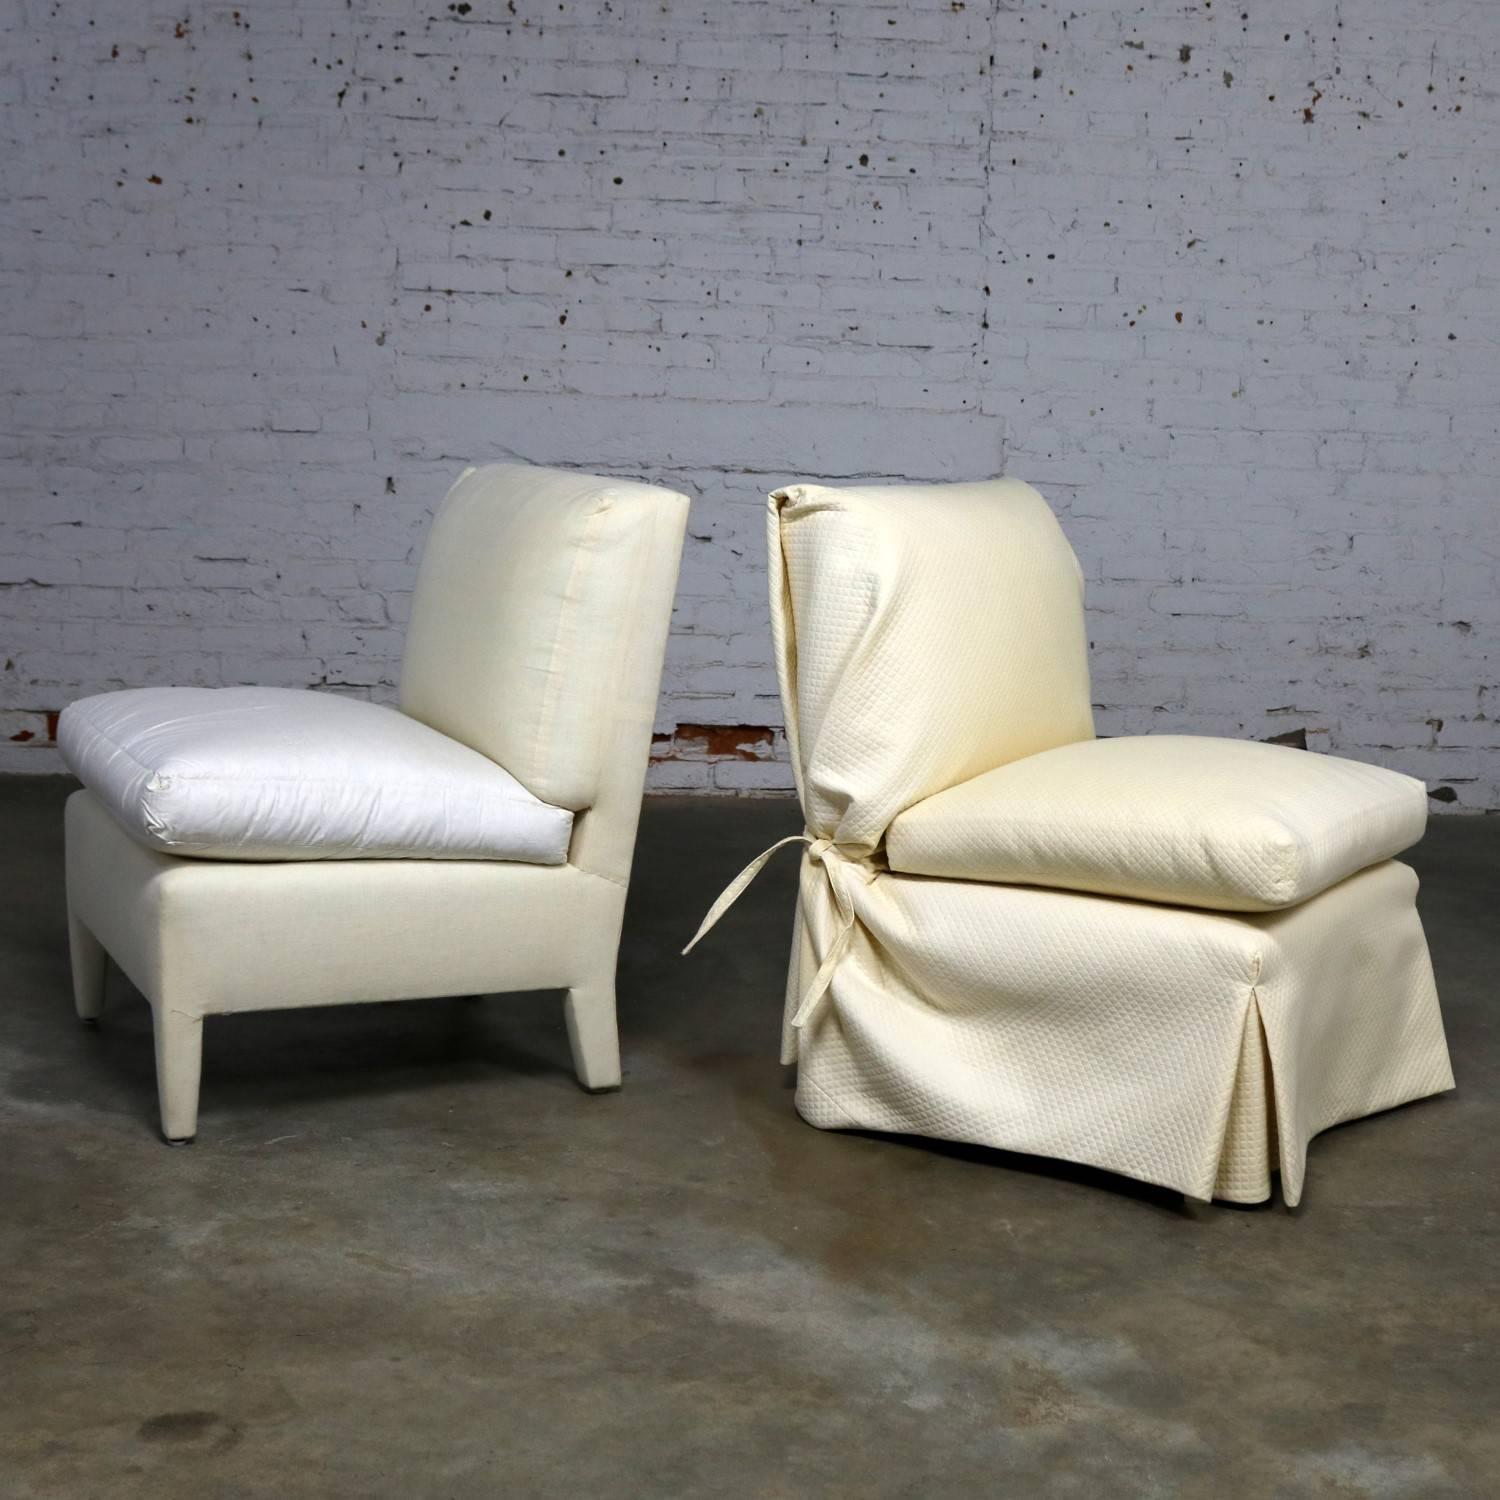 Modern Donghia Slipper Chair by Angelo Donghia, One Slipcovered One Not